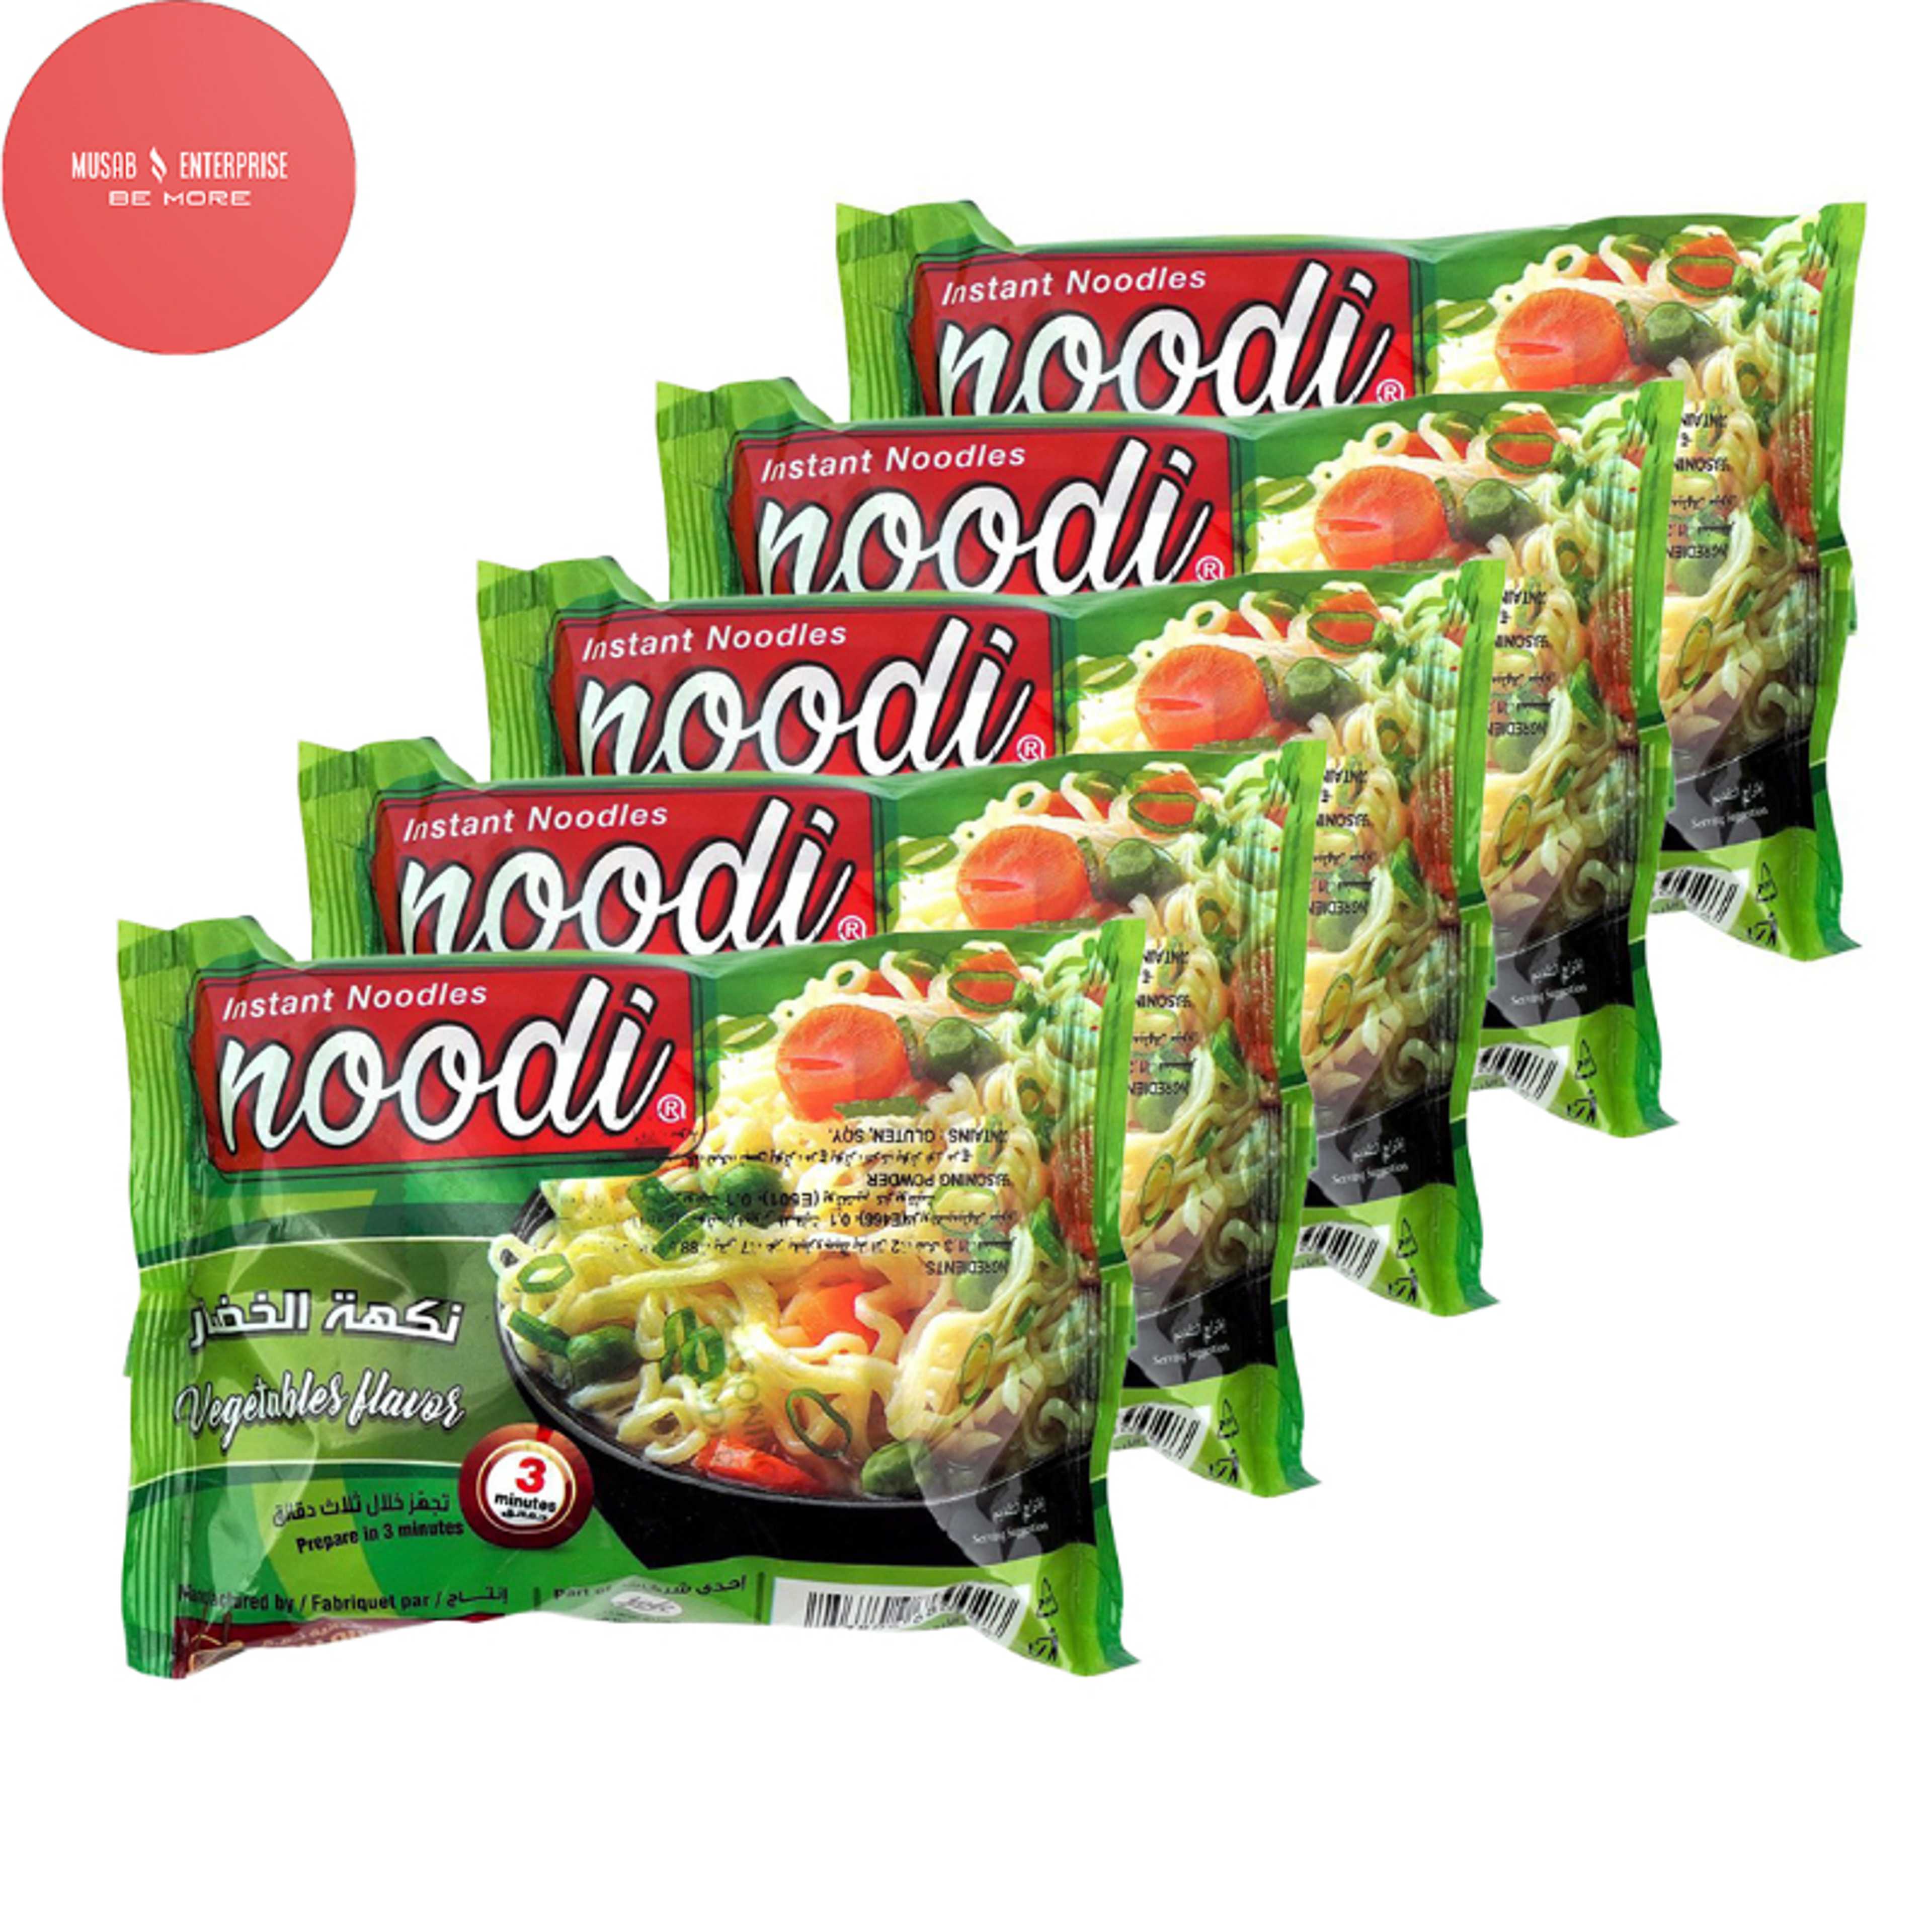 Noodi Vegtable Flavor Instant Noodles, 70g, Pack of 5 Noodles (Available in 9 Exciting Flavors)